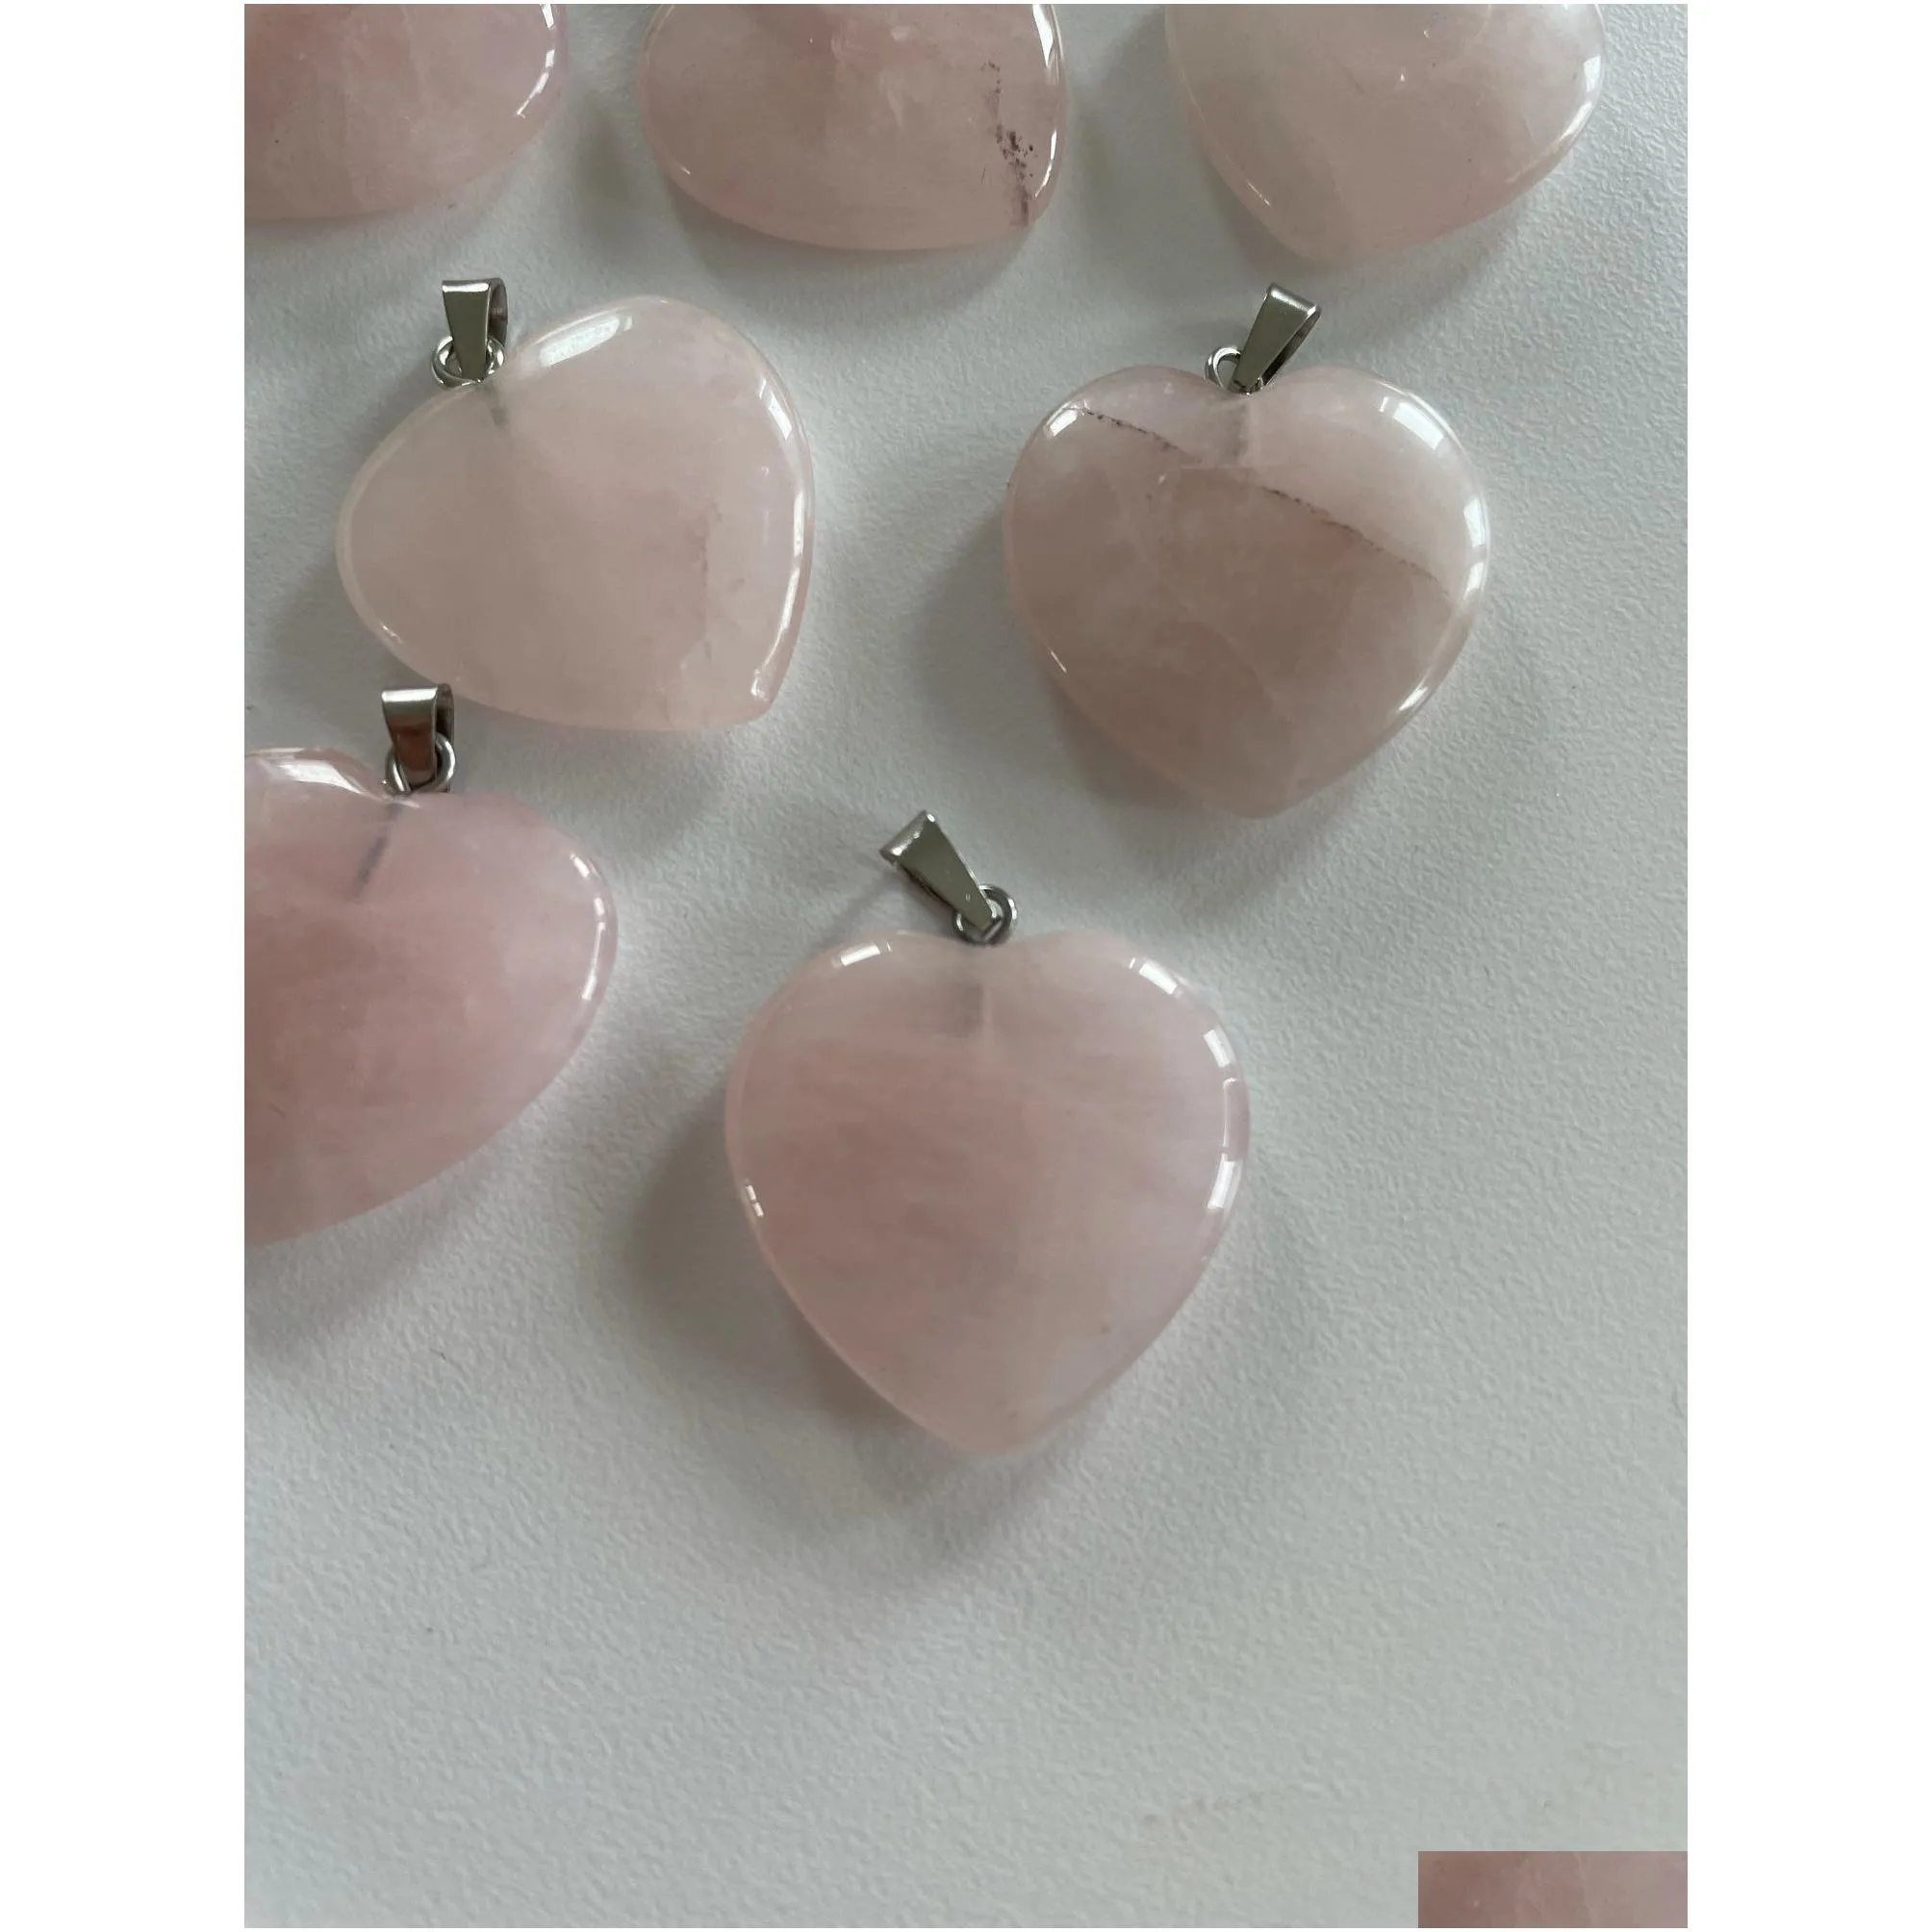 rose quartz heart natural stone charms chakra healing pendant diy necklace earrings jewelry making